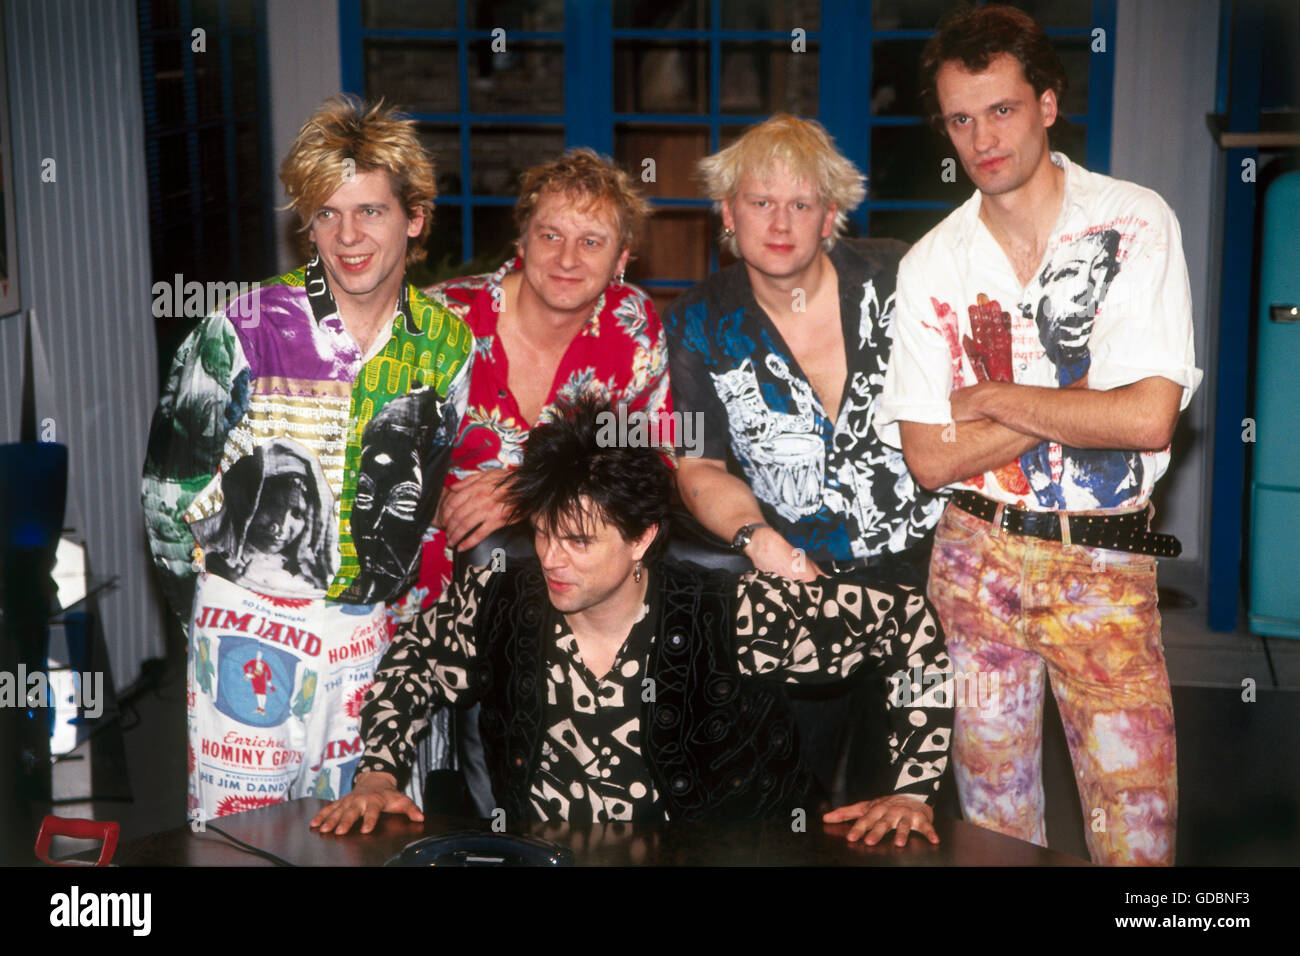 Die Toten Hosen, German music group, founded 1982, Campino, Andreas von  Holst, Michael Breitkopf, Andreas Meurer, Wolfgang Rohde, group picture,  1993 Stock Photo - Alamy